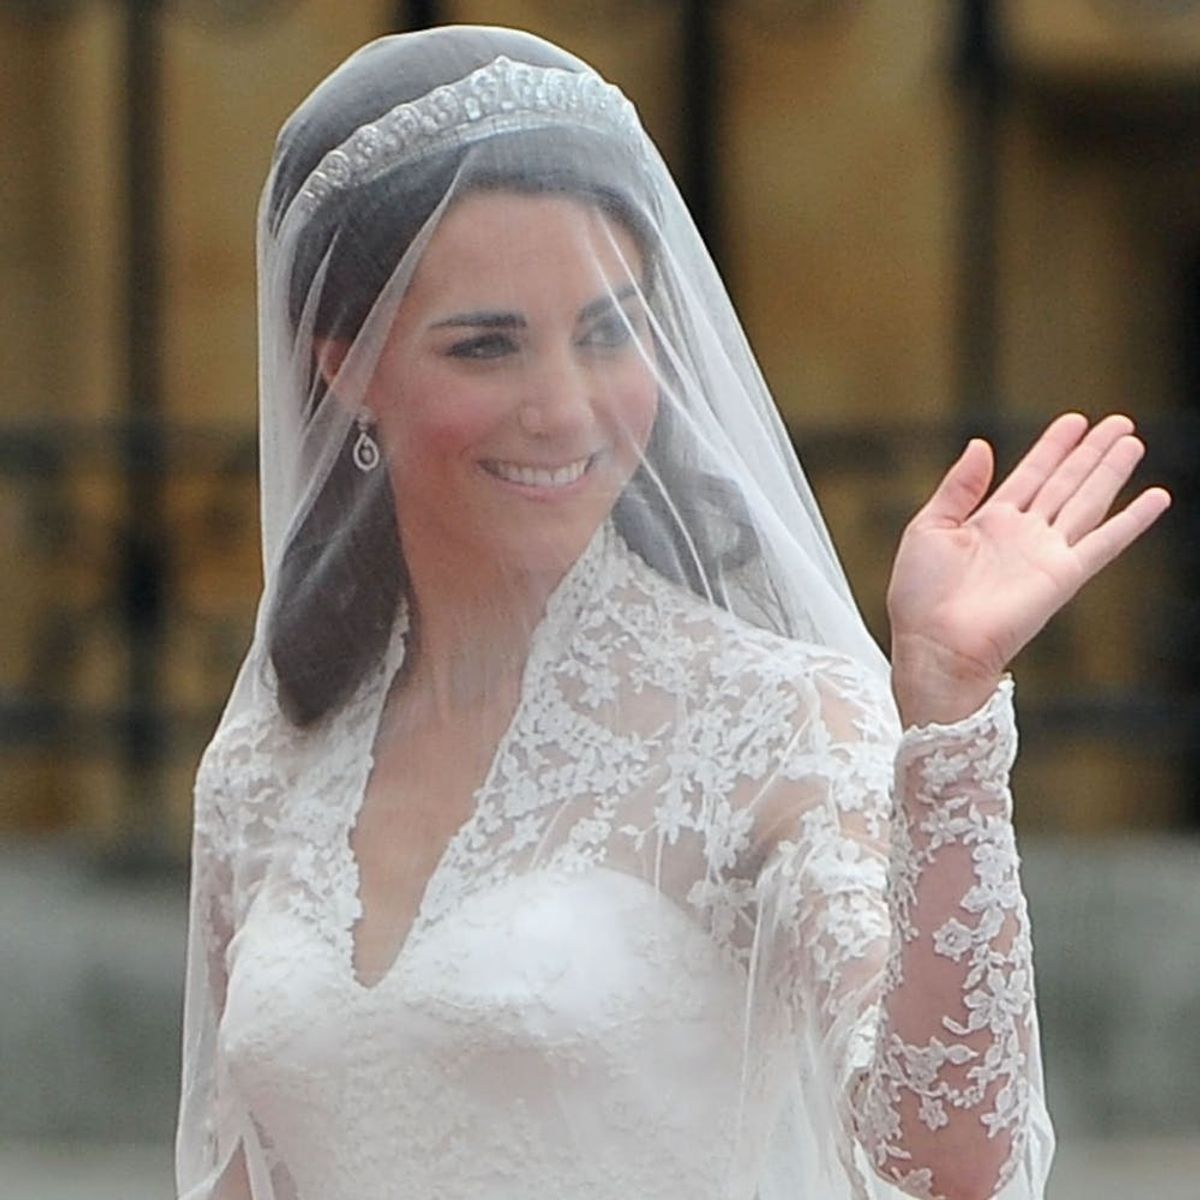 21 of the Most Buzzed-About Royal Wedding Dresses of All Time